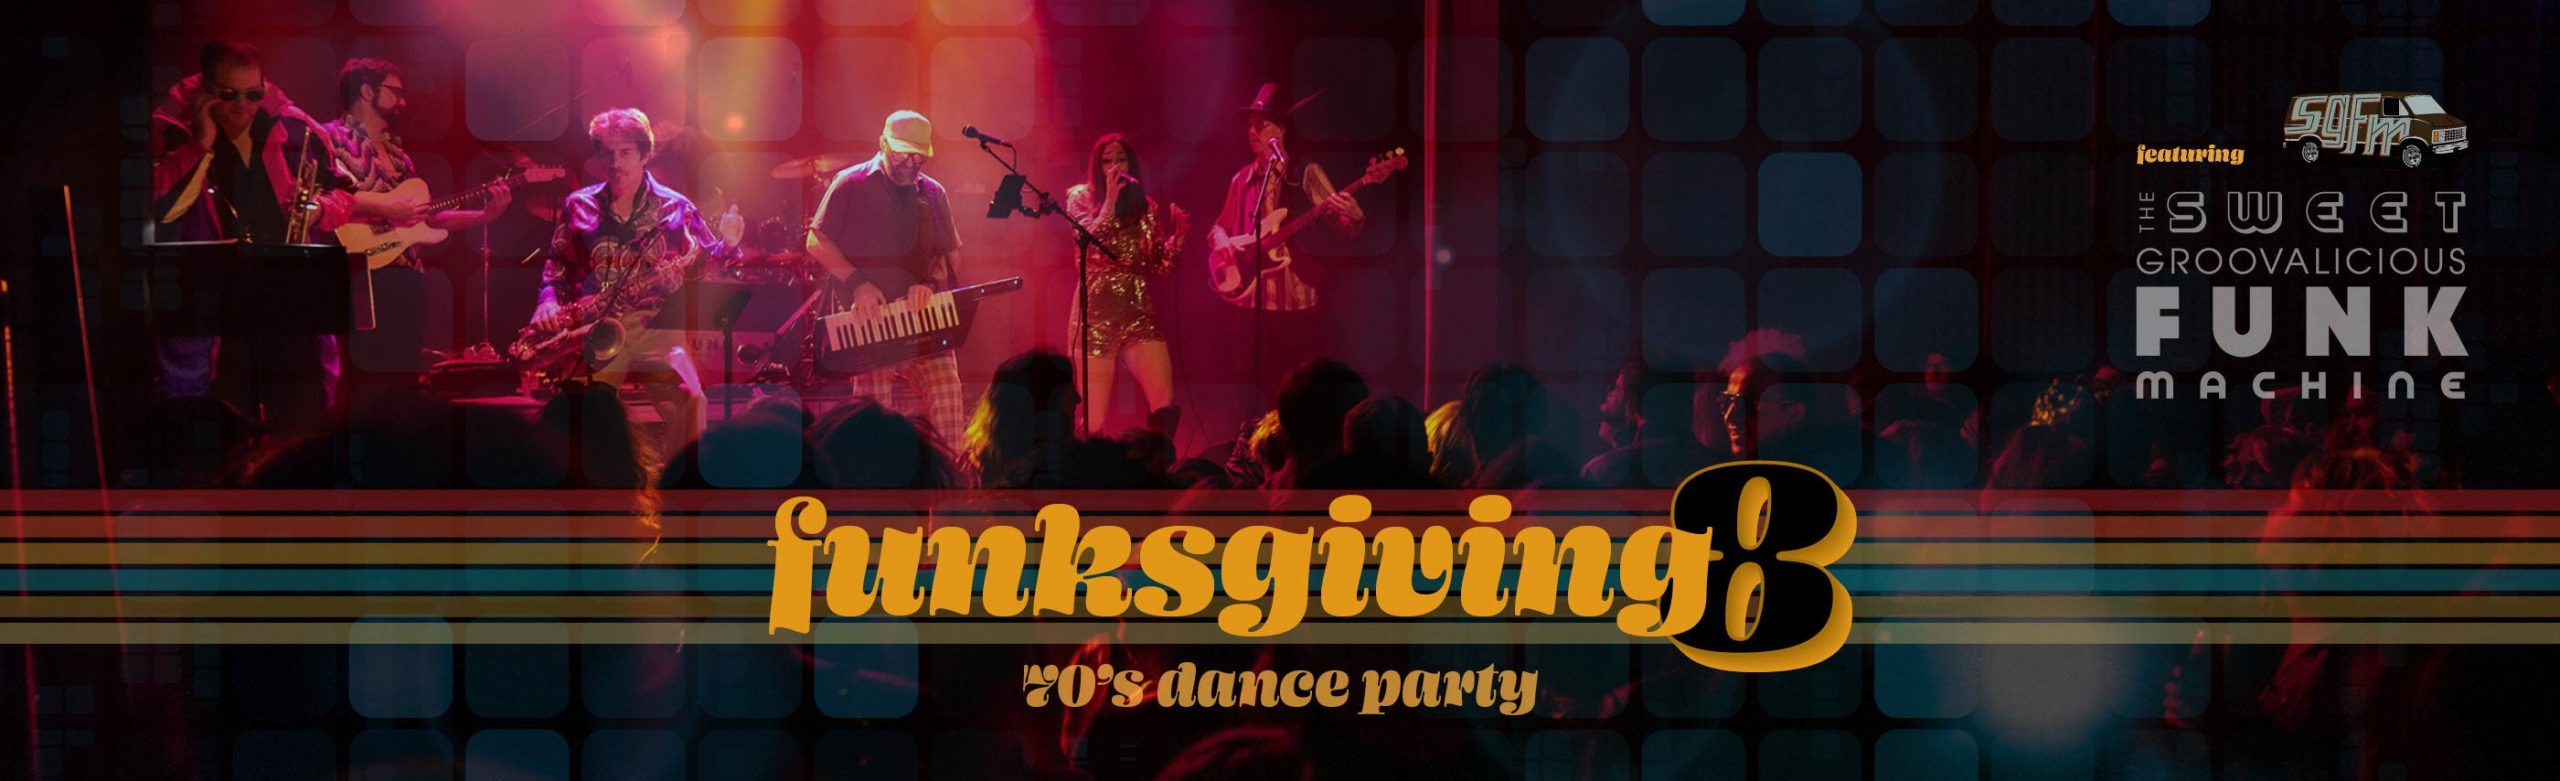 8th Annual FUNKSGIVING Confirmed at The ELM in 2022 Image